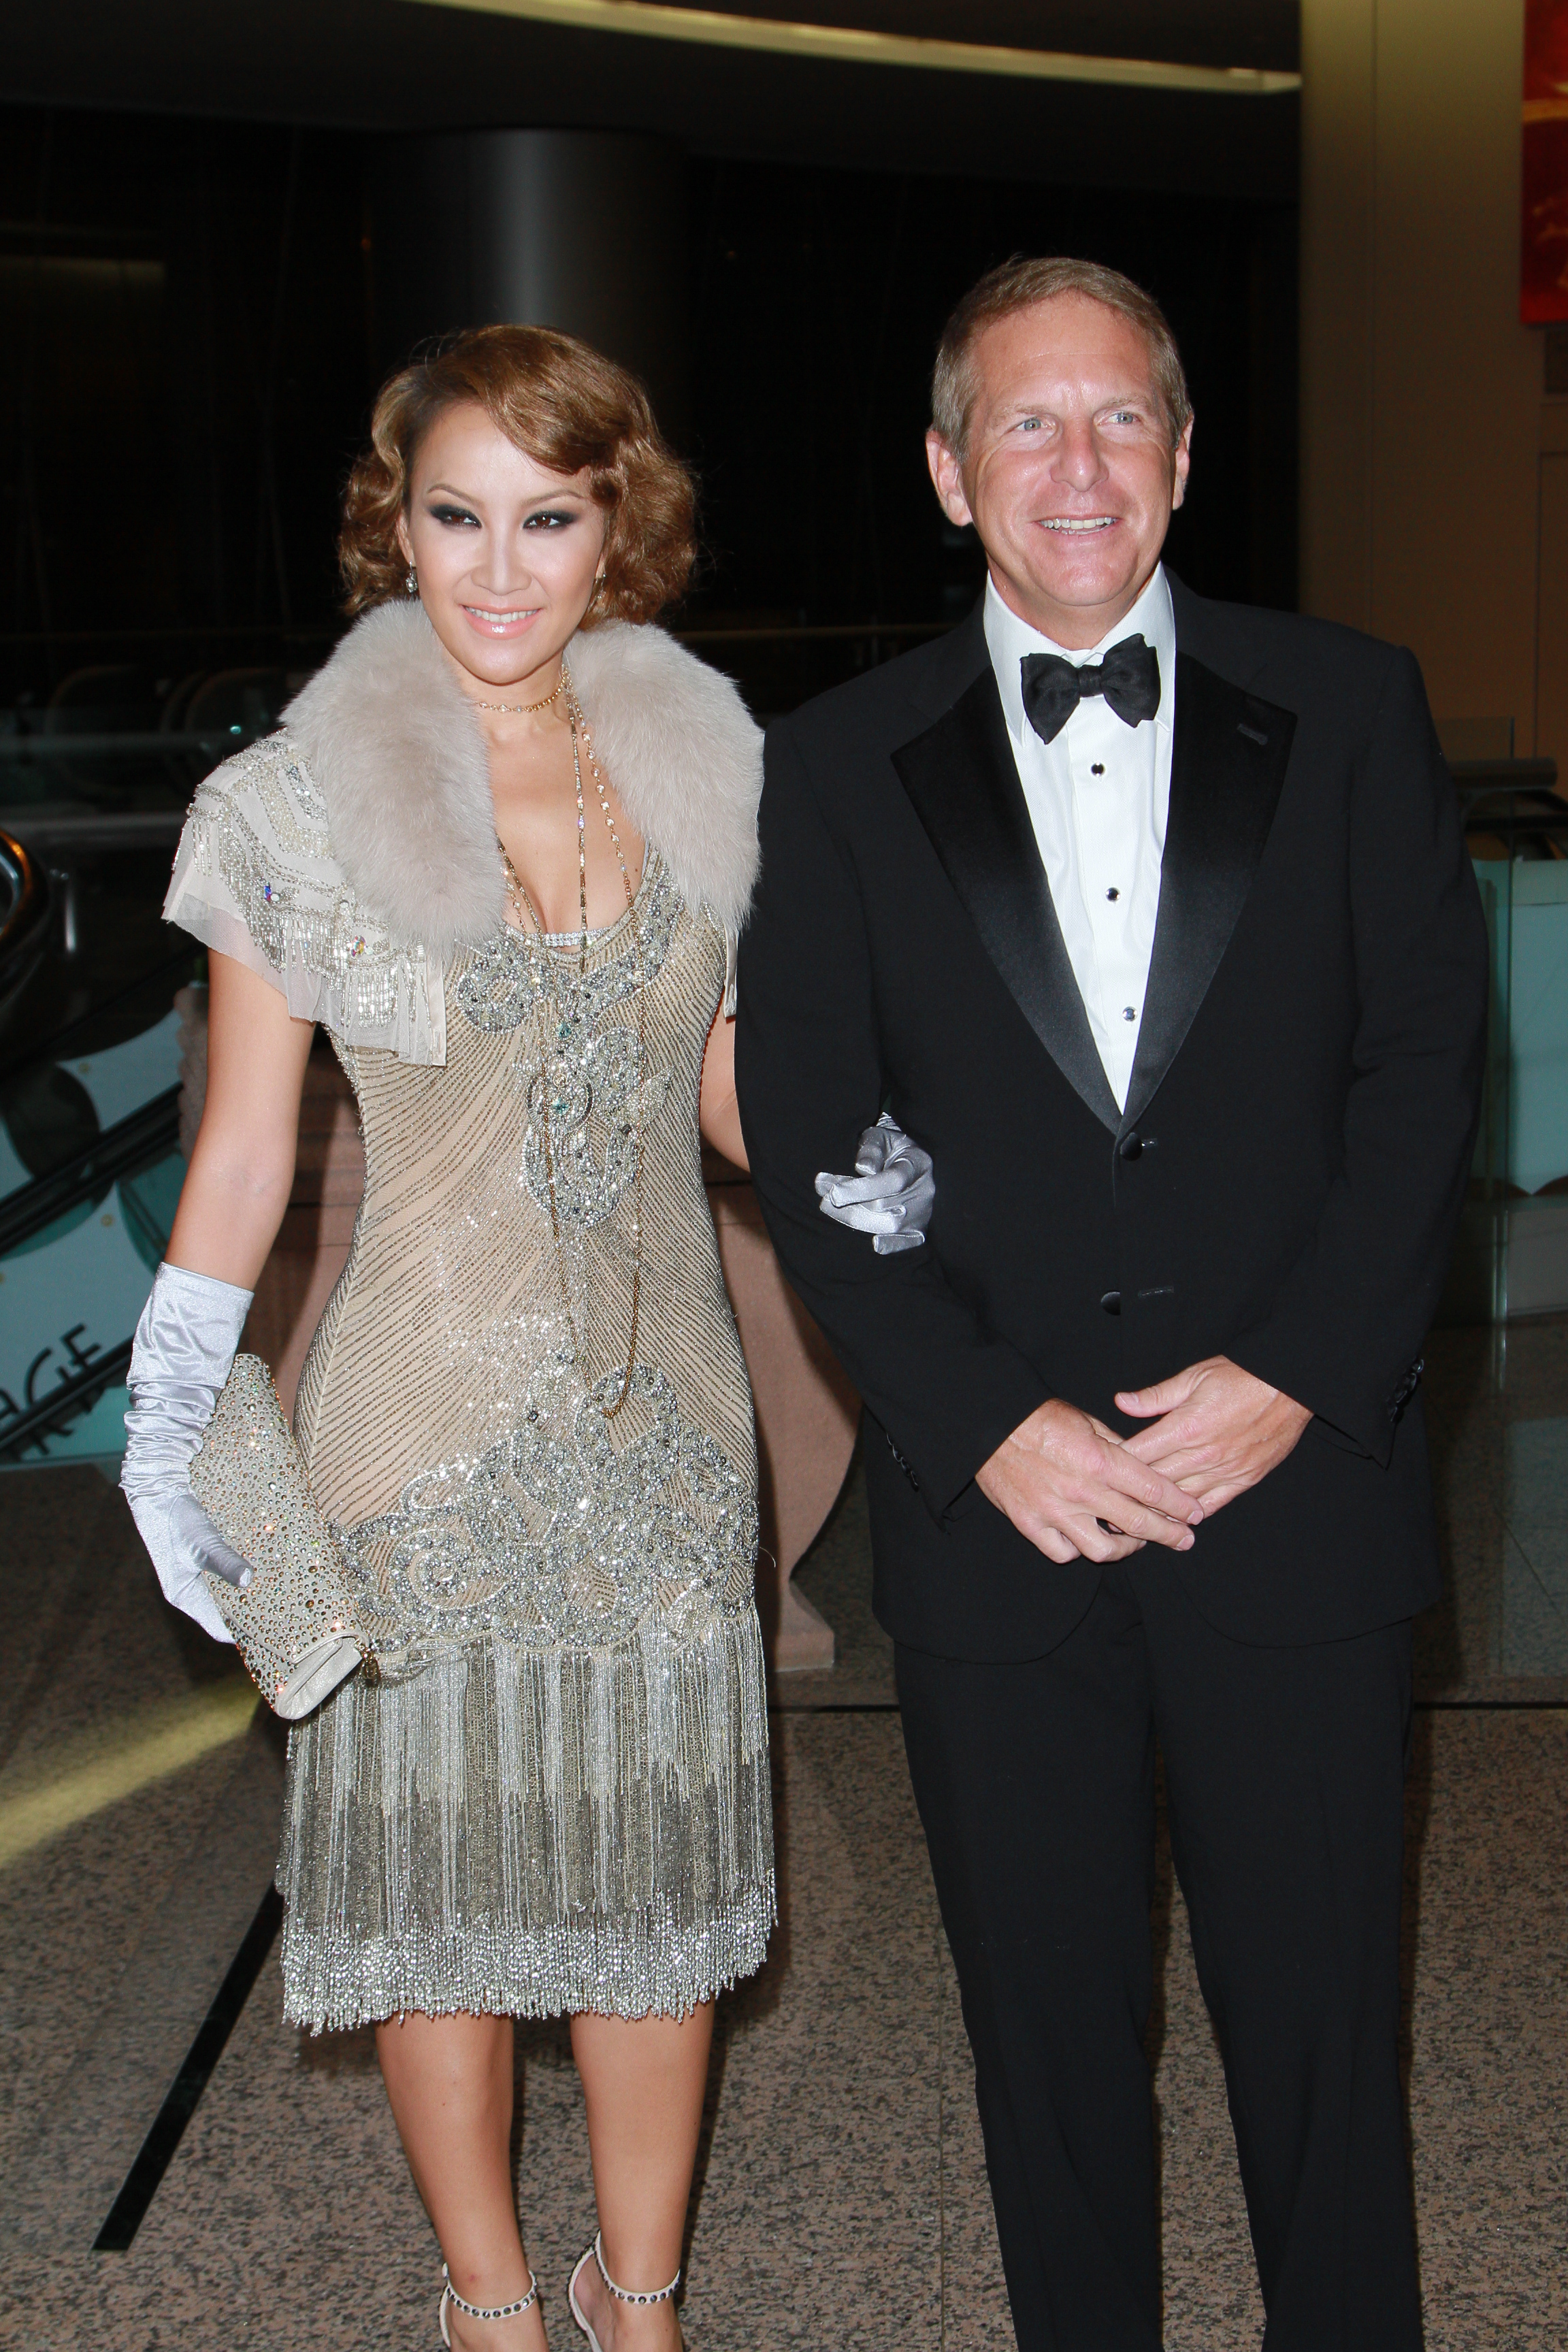 Coco Lee and Bruce Rockowitz at the Hong Kong Cancer Fund charity dinner on February 25, 2012, in Hong Kong, Hong Kong. | Source: Getty Images